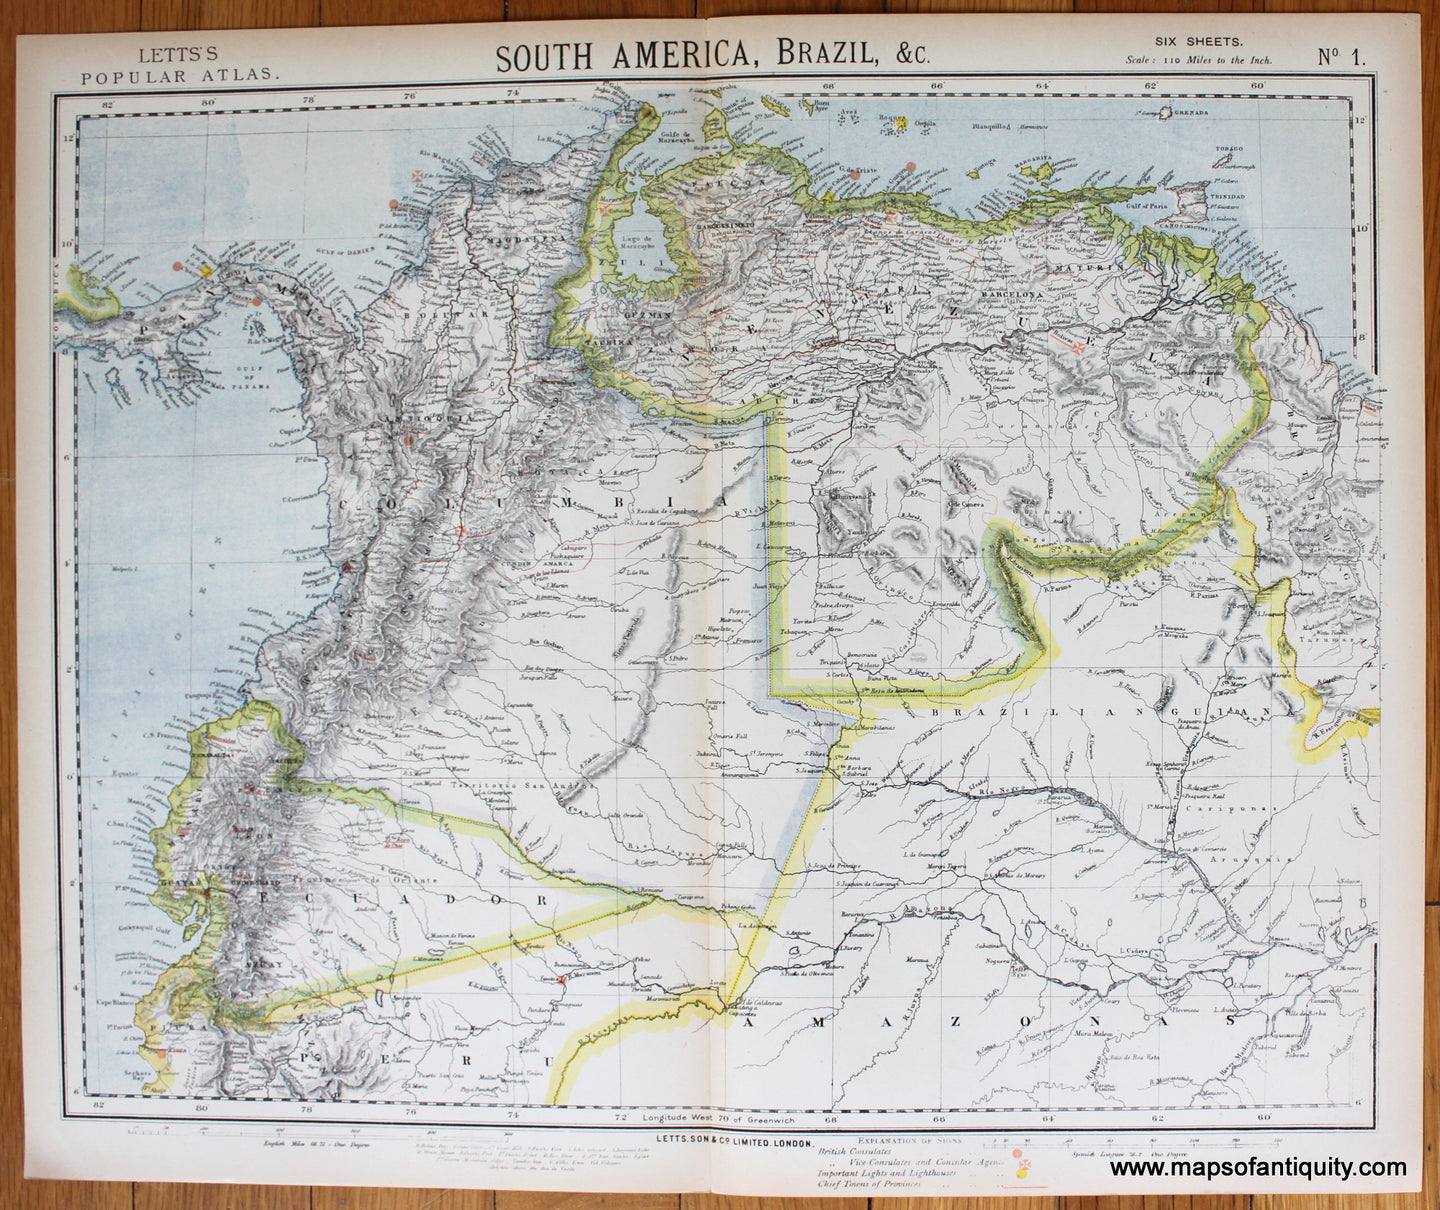 printed-color-Antique-Map-South-America-Brazil-Etc.-Sheet-One-of-Six-South-America-South-America-General-1883-Letts-Maps-Of-Antiquity